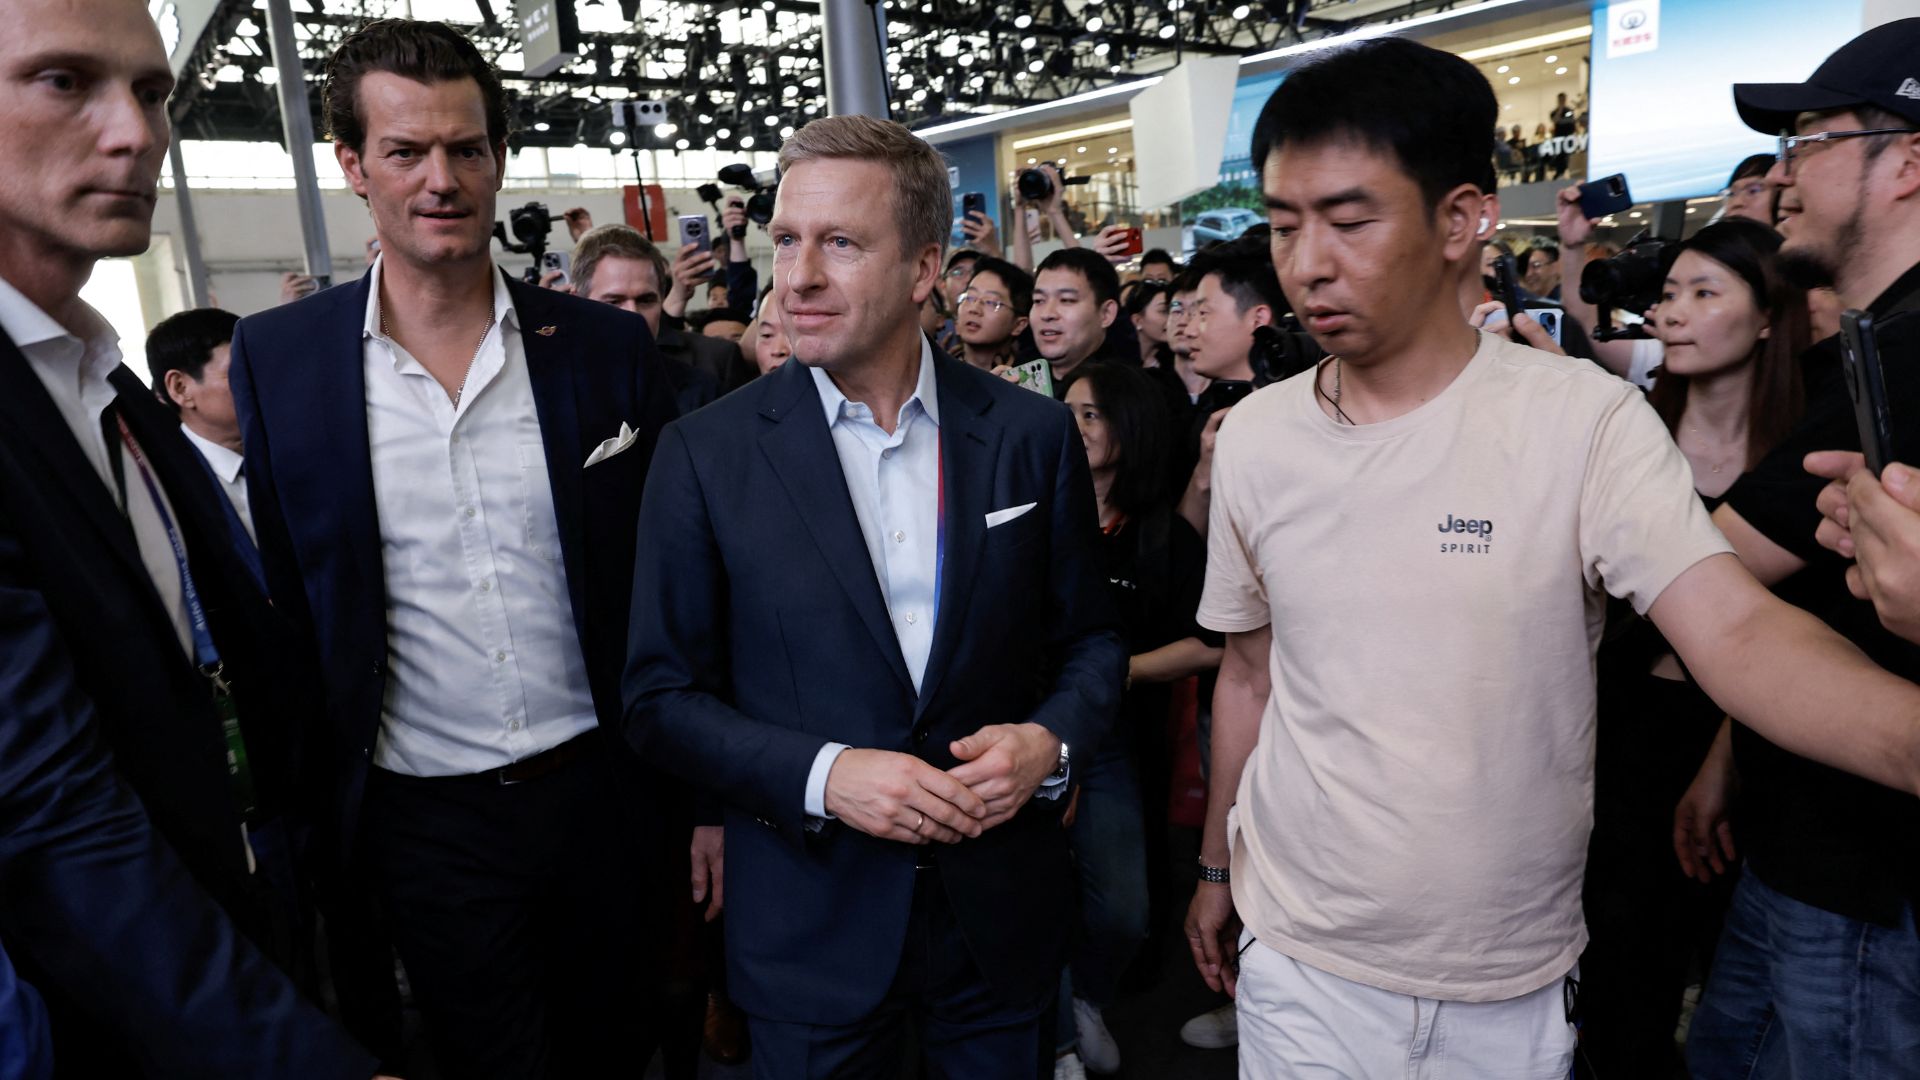 BMW's CEO Oliver Zipse at the Beijing International Automotive Exhibition last month - but will his company's joint ventures in China be punished by new tariffs? /Tingshu Wang/Reuters